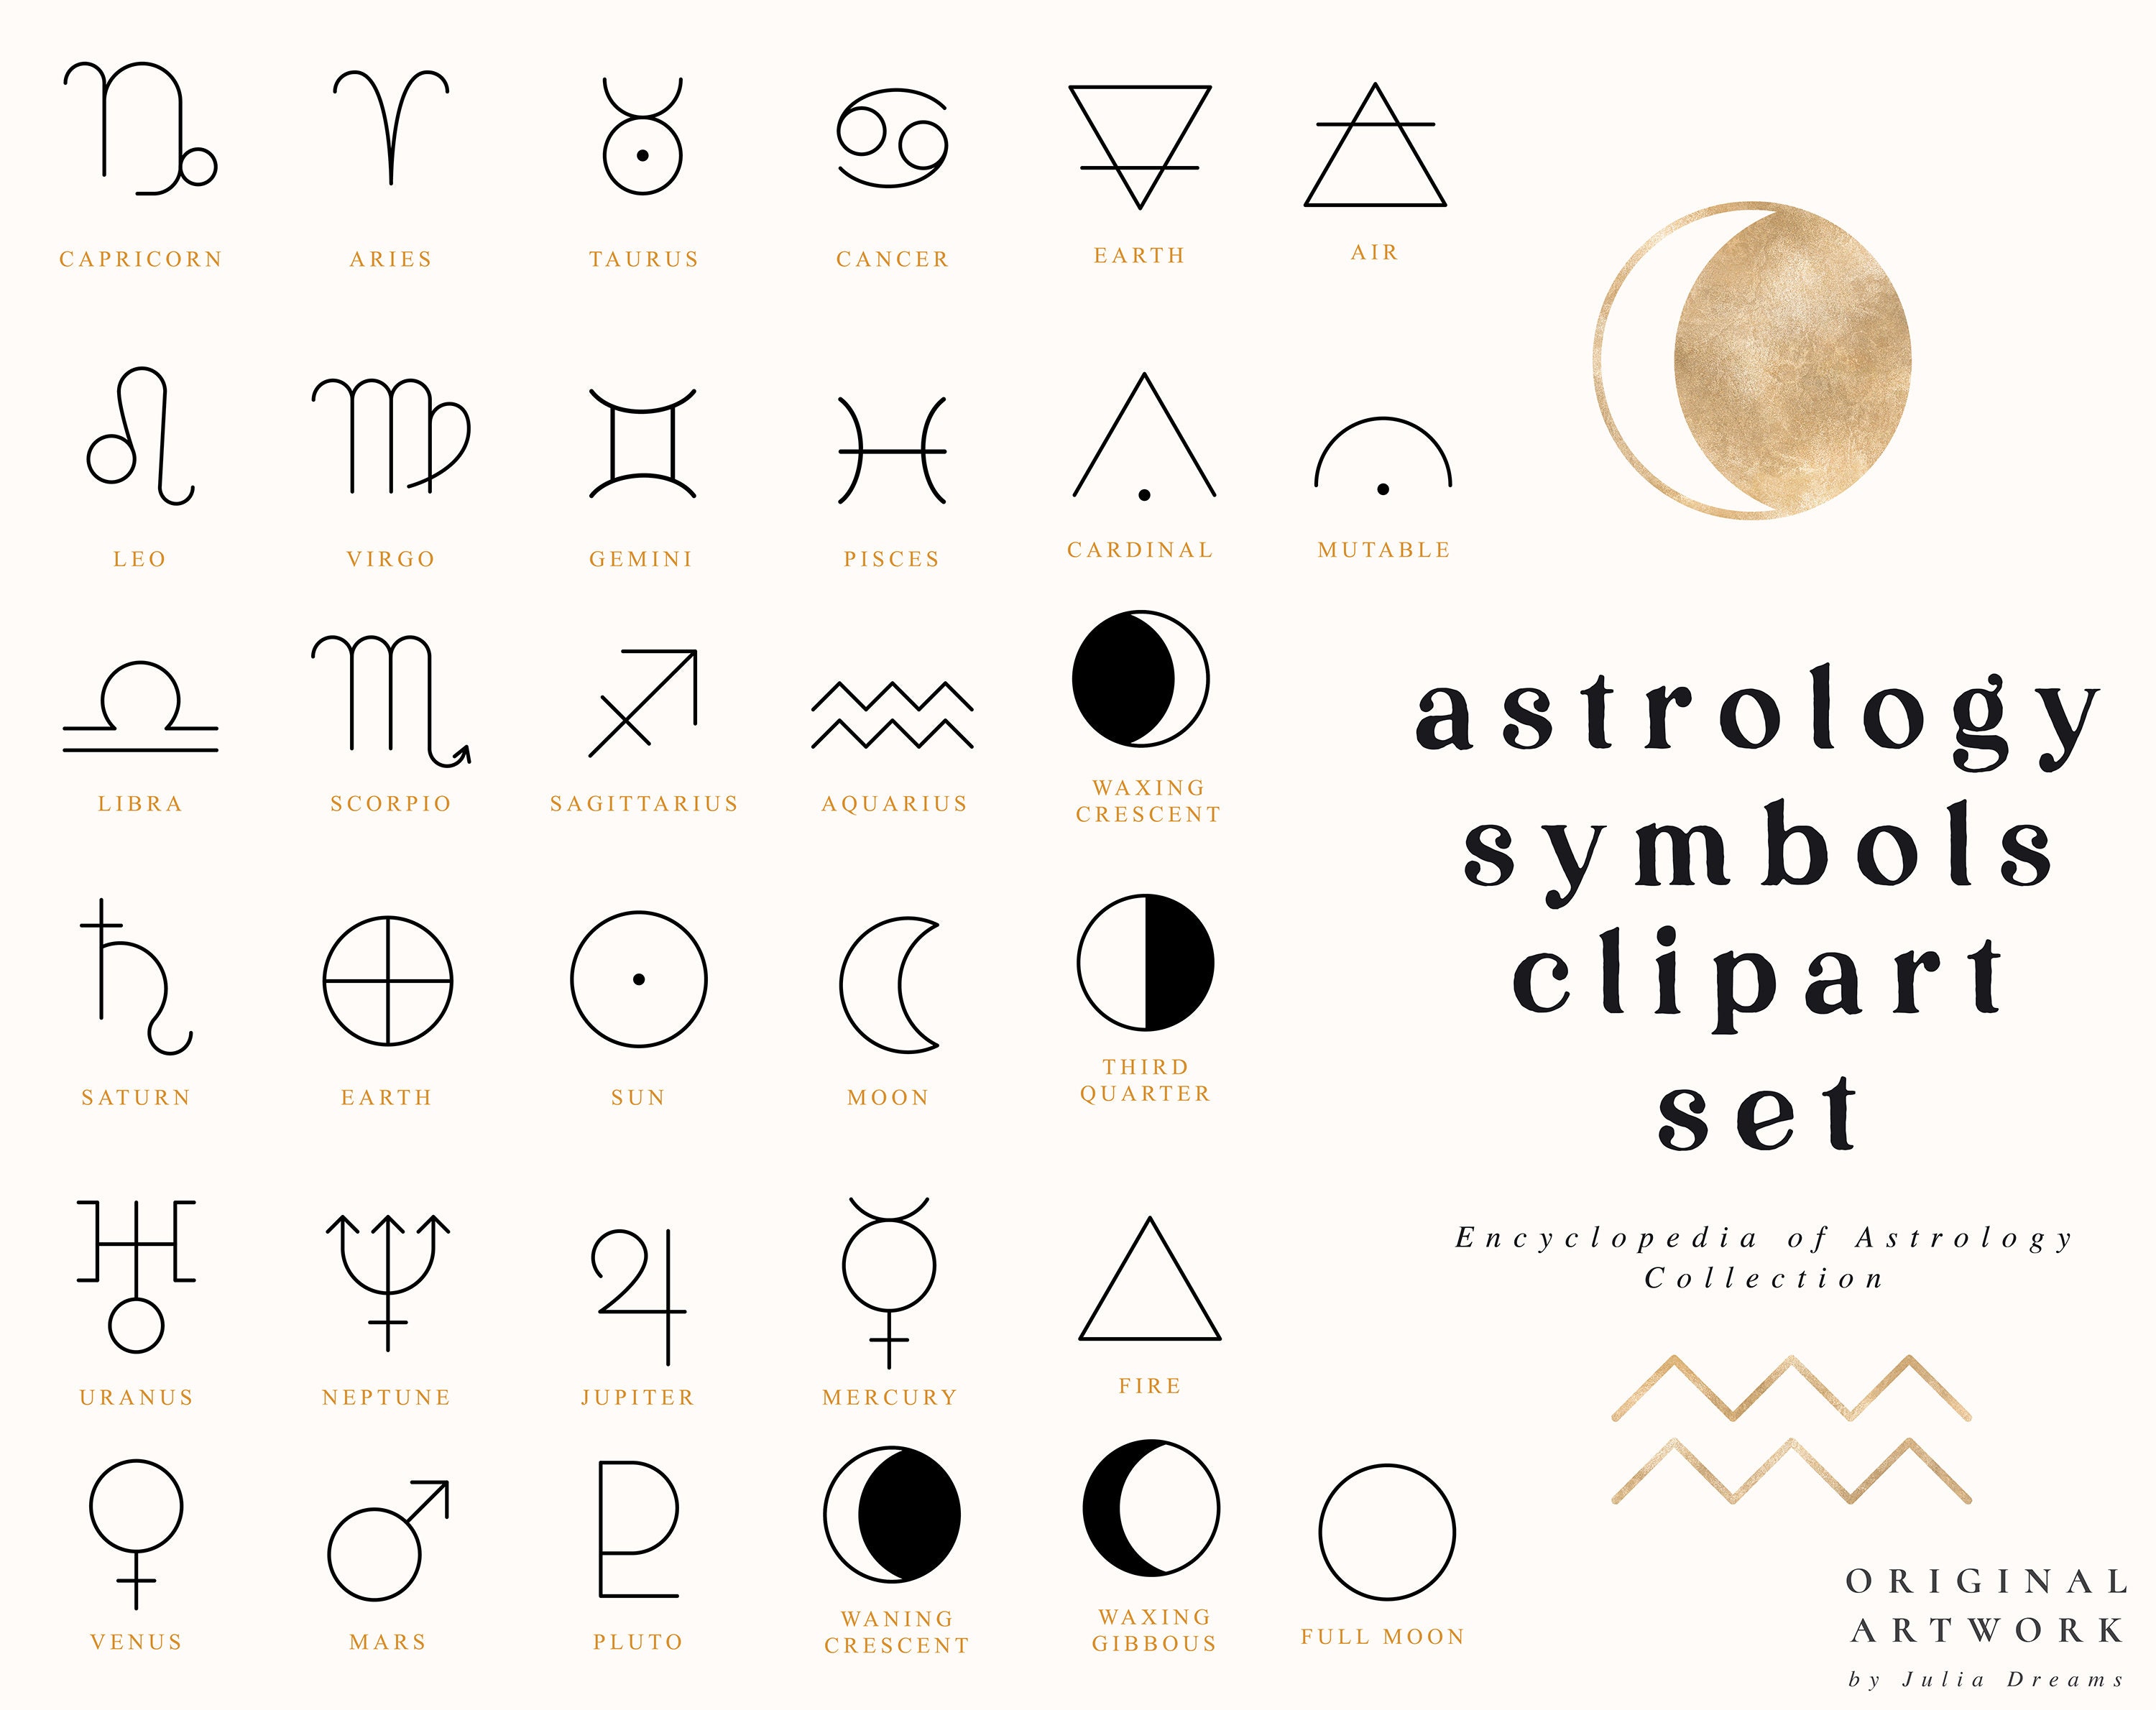 Mastering The Way Of Your Astrology Language Is Not An Accident - It's An Art